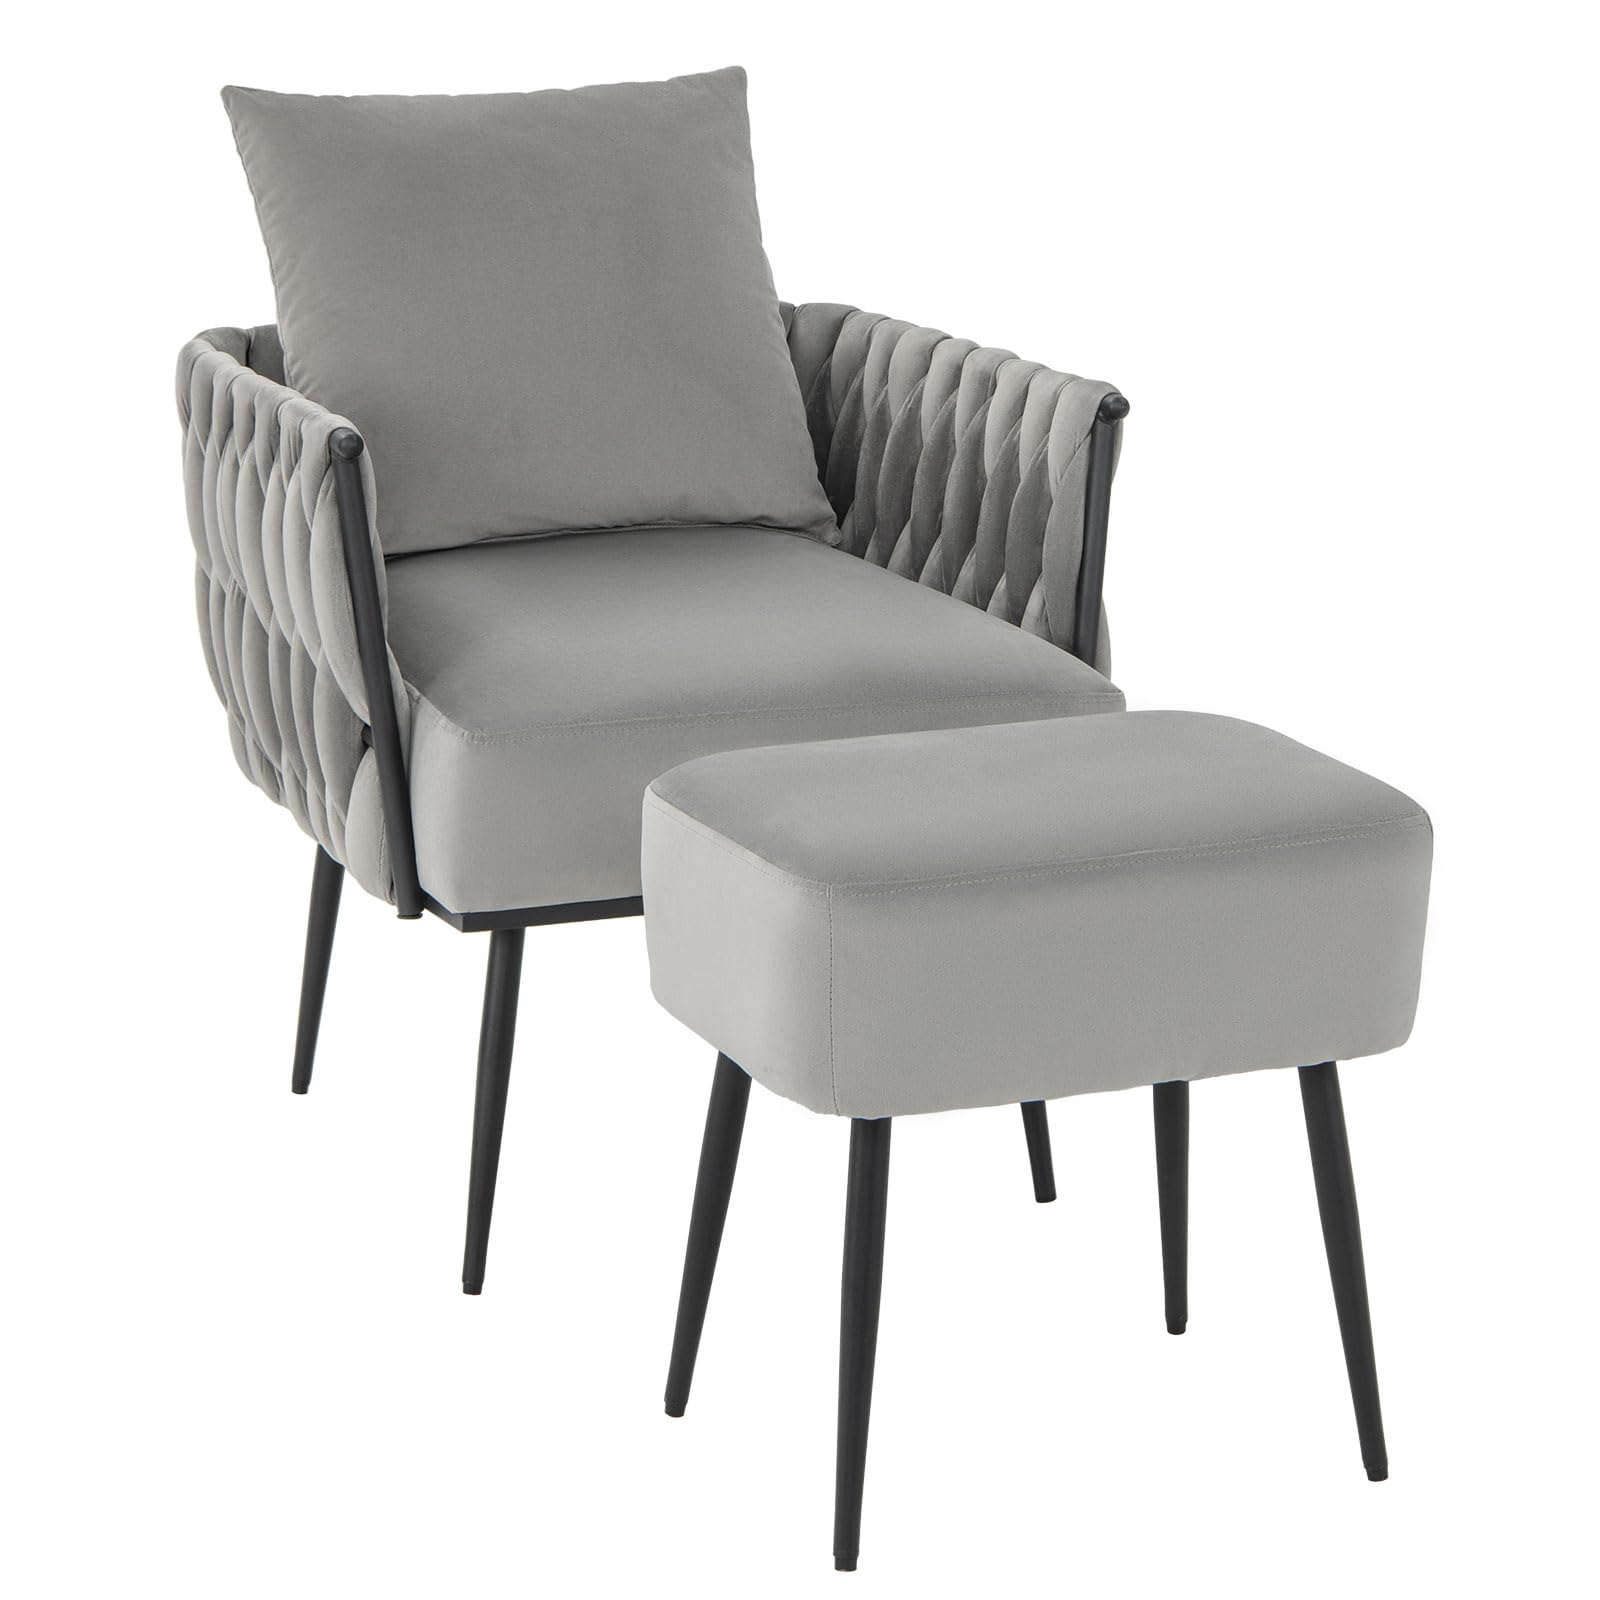 Giantex Velvet Accent Chair with Ottoman, Modern Comfy Arm Chair w/Solid Metal Frame, Pillow